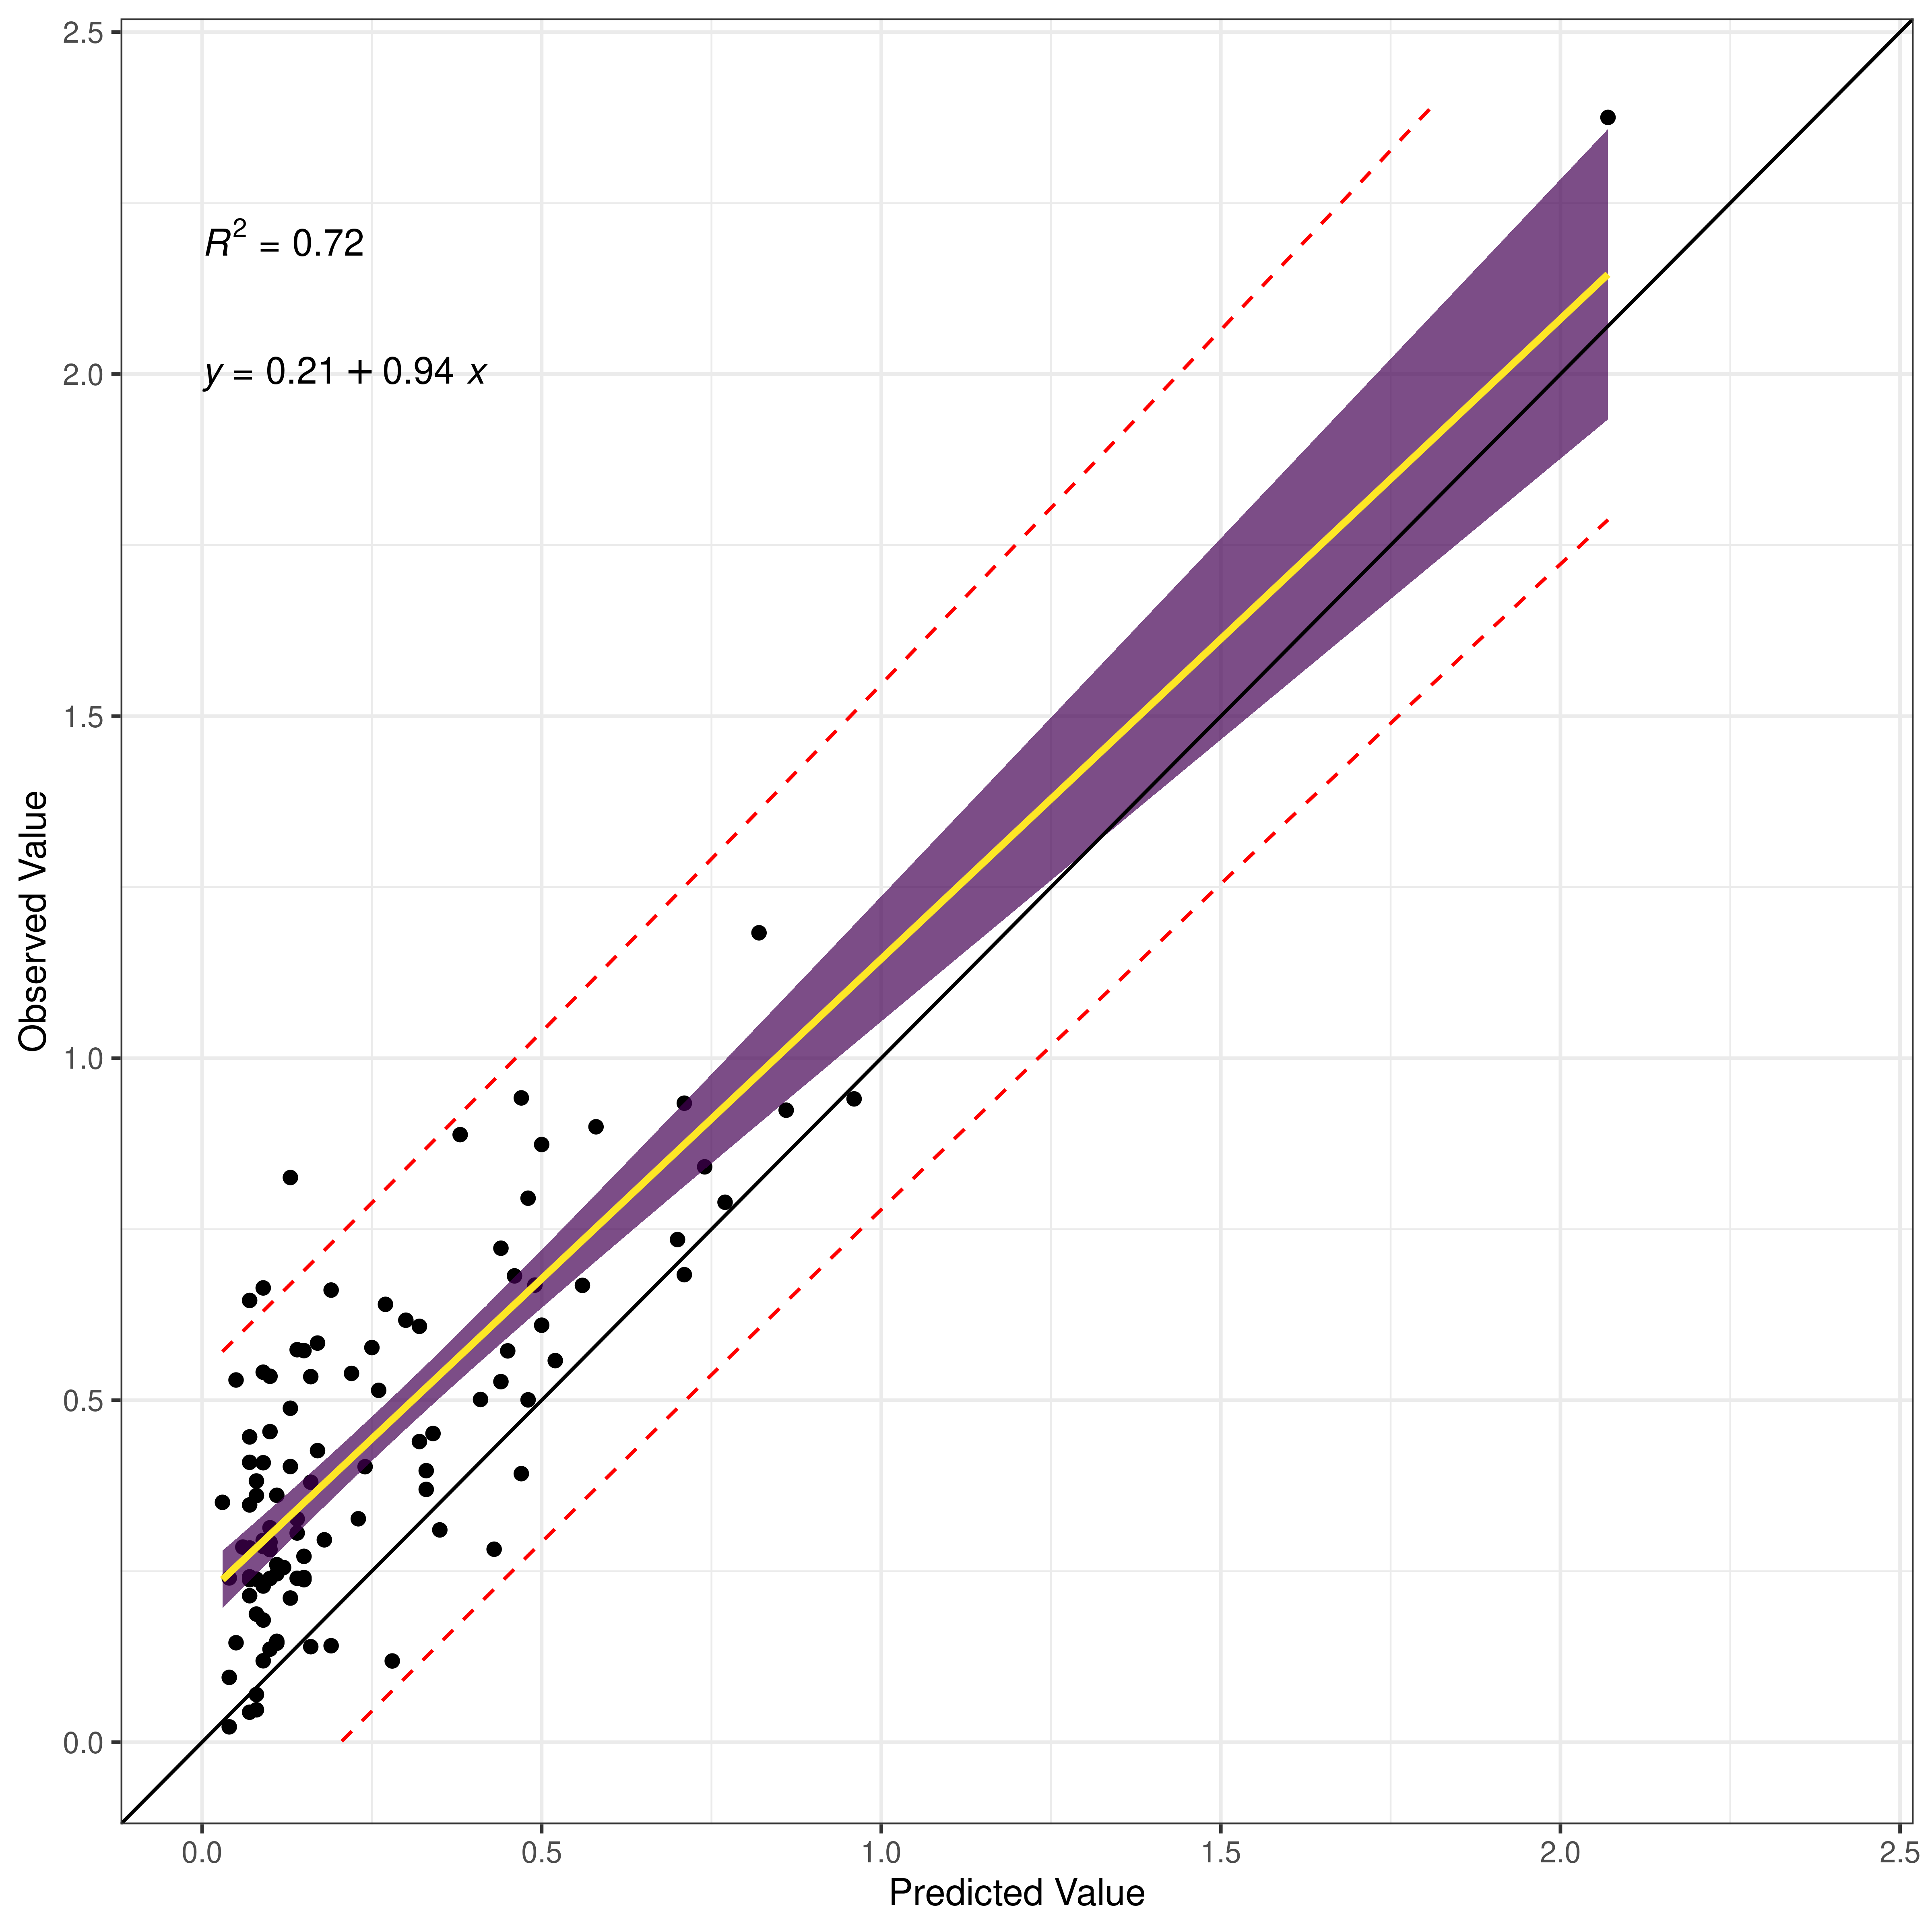 Calibration Plot for Predictions of a Continuous Outcome, With Best-Fit Line. The black diagonal line indicates the reference line with an intercept of zero and a slope of one. The yellow line is the best-fit line. The purple band is the 95% confidence interval of the observed value. The dashed red lines are the 95% prediction interval of the observed value. The predictions are not well calibrated because the 95% confidence interval of the intercept does not include zero (even though the 95% confidence interval of the slope includes one). The intercept from the best-fit line is positive, as shown in the regression equation. This is a case of underprediction, where the predicted values are consistently less than the observed values. The 95% confidence interval of the observed value does not include the reference line (i.e., the actual observed value) at lower levels of the predicted values, so the predictions are miscalibrated at lower levels of the predicted values.